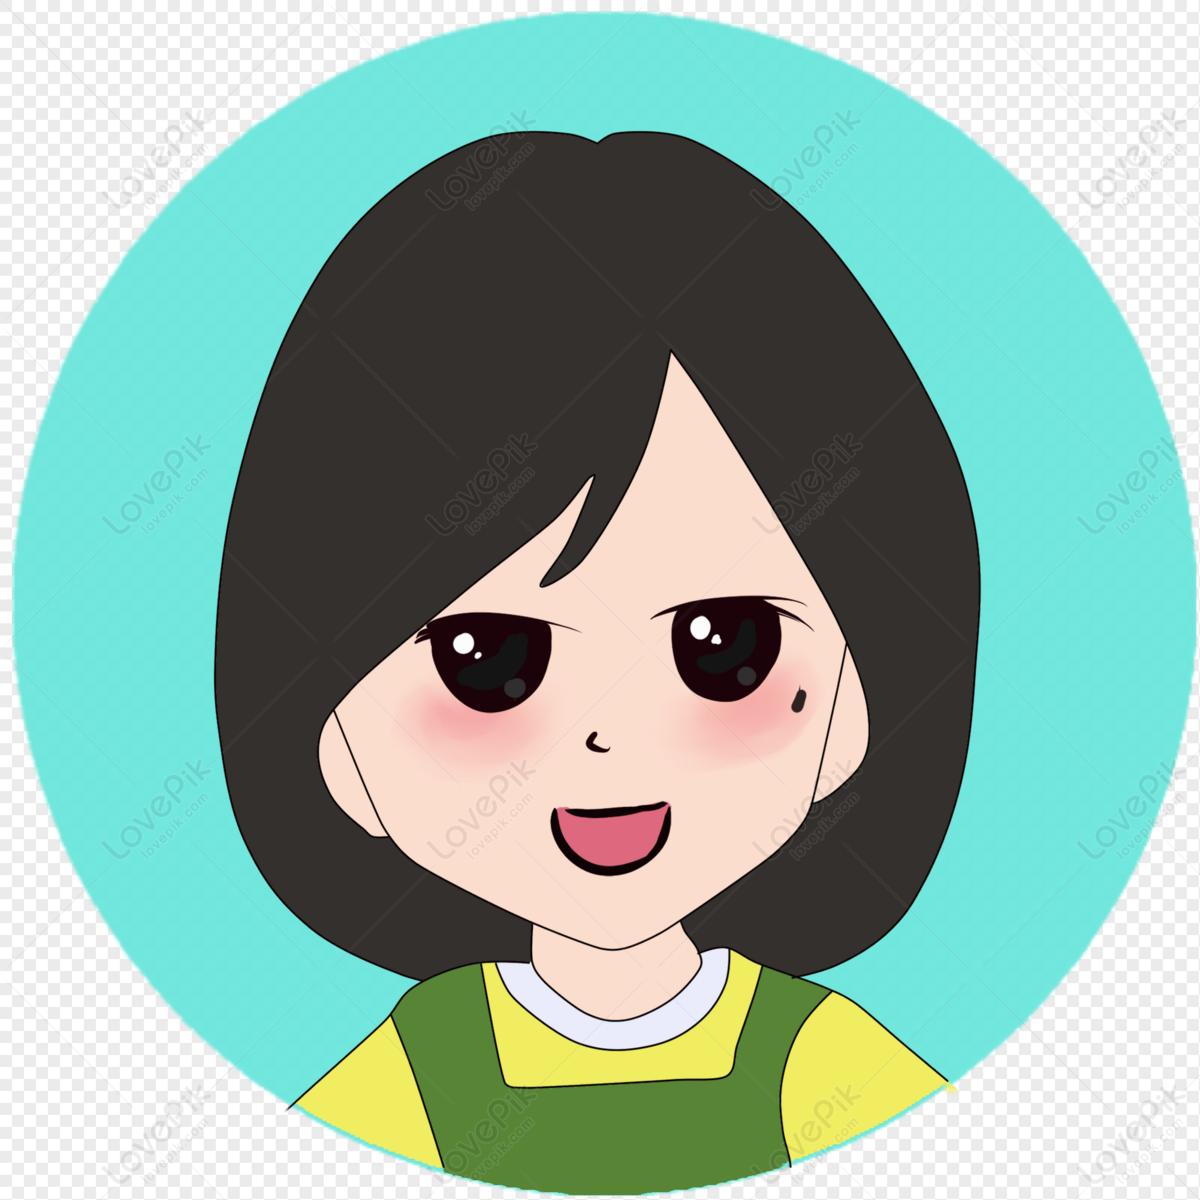 Cartoon Avatar PNG Transparent Image And Clipart Image For Free ...